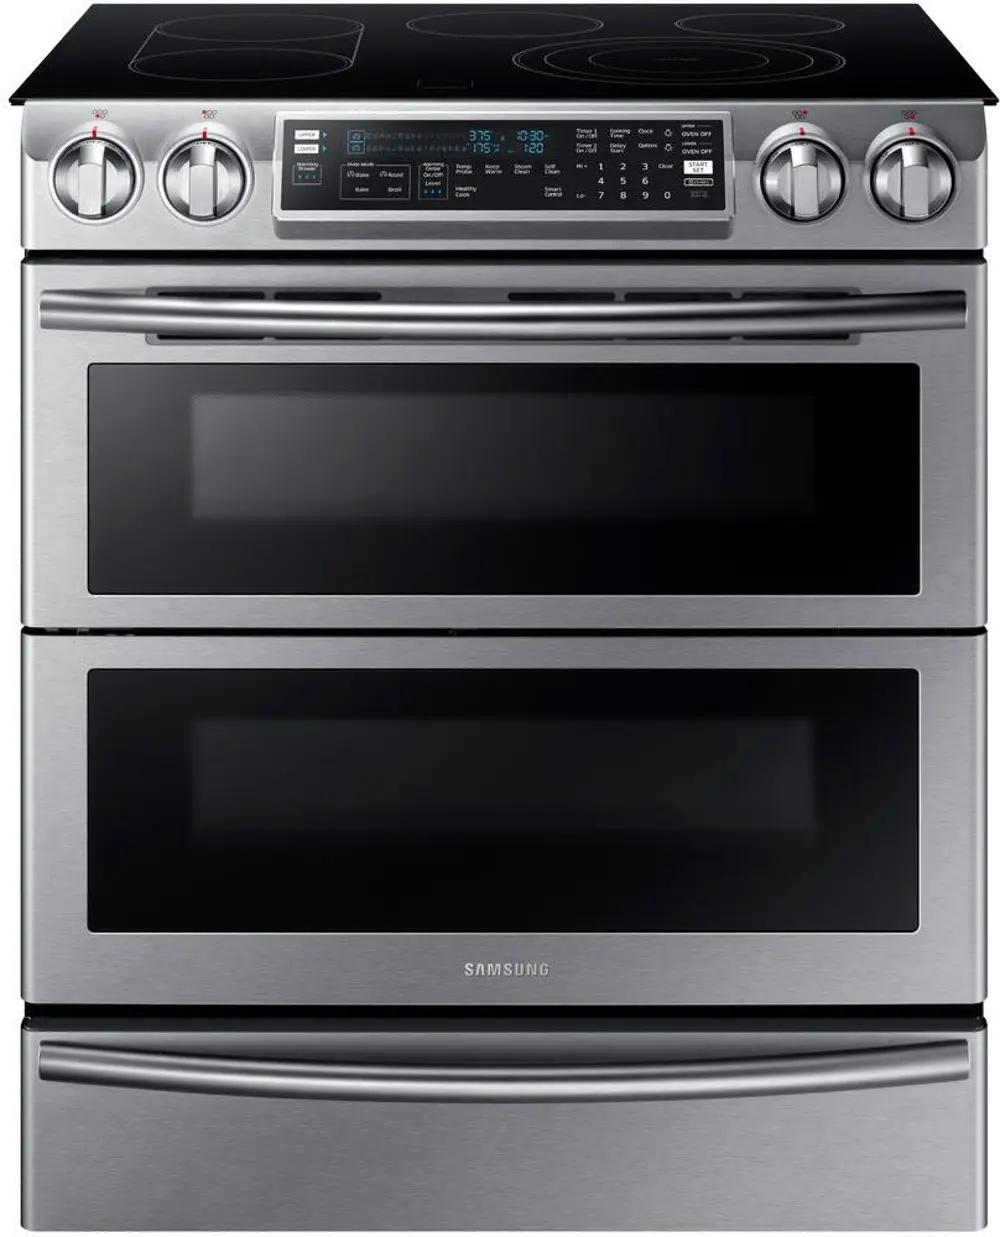 NE58K9850WS Samsung Double Oven Electric Range - 5.8 cu. ft. Stainless Steel-1